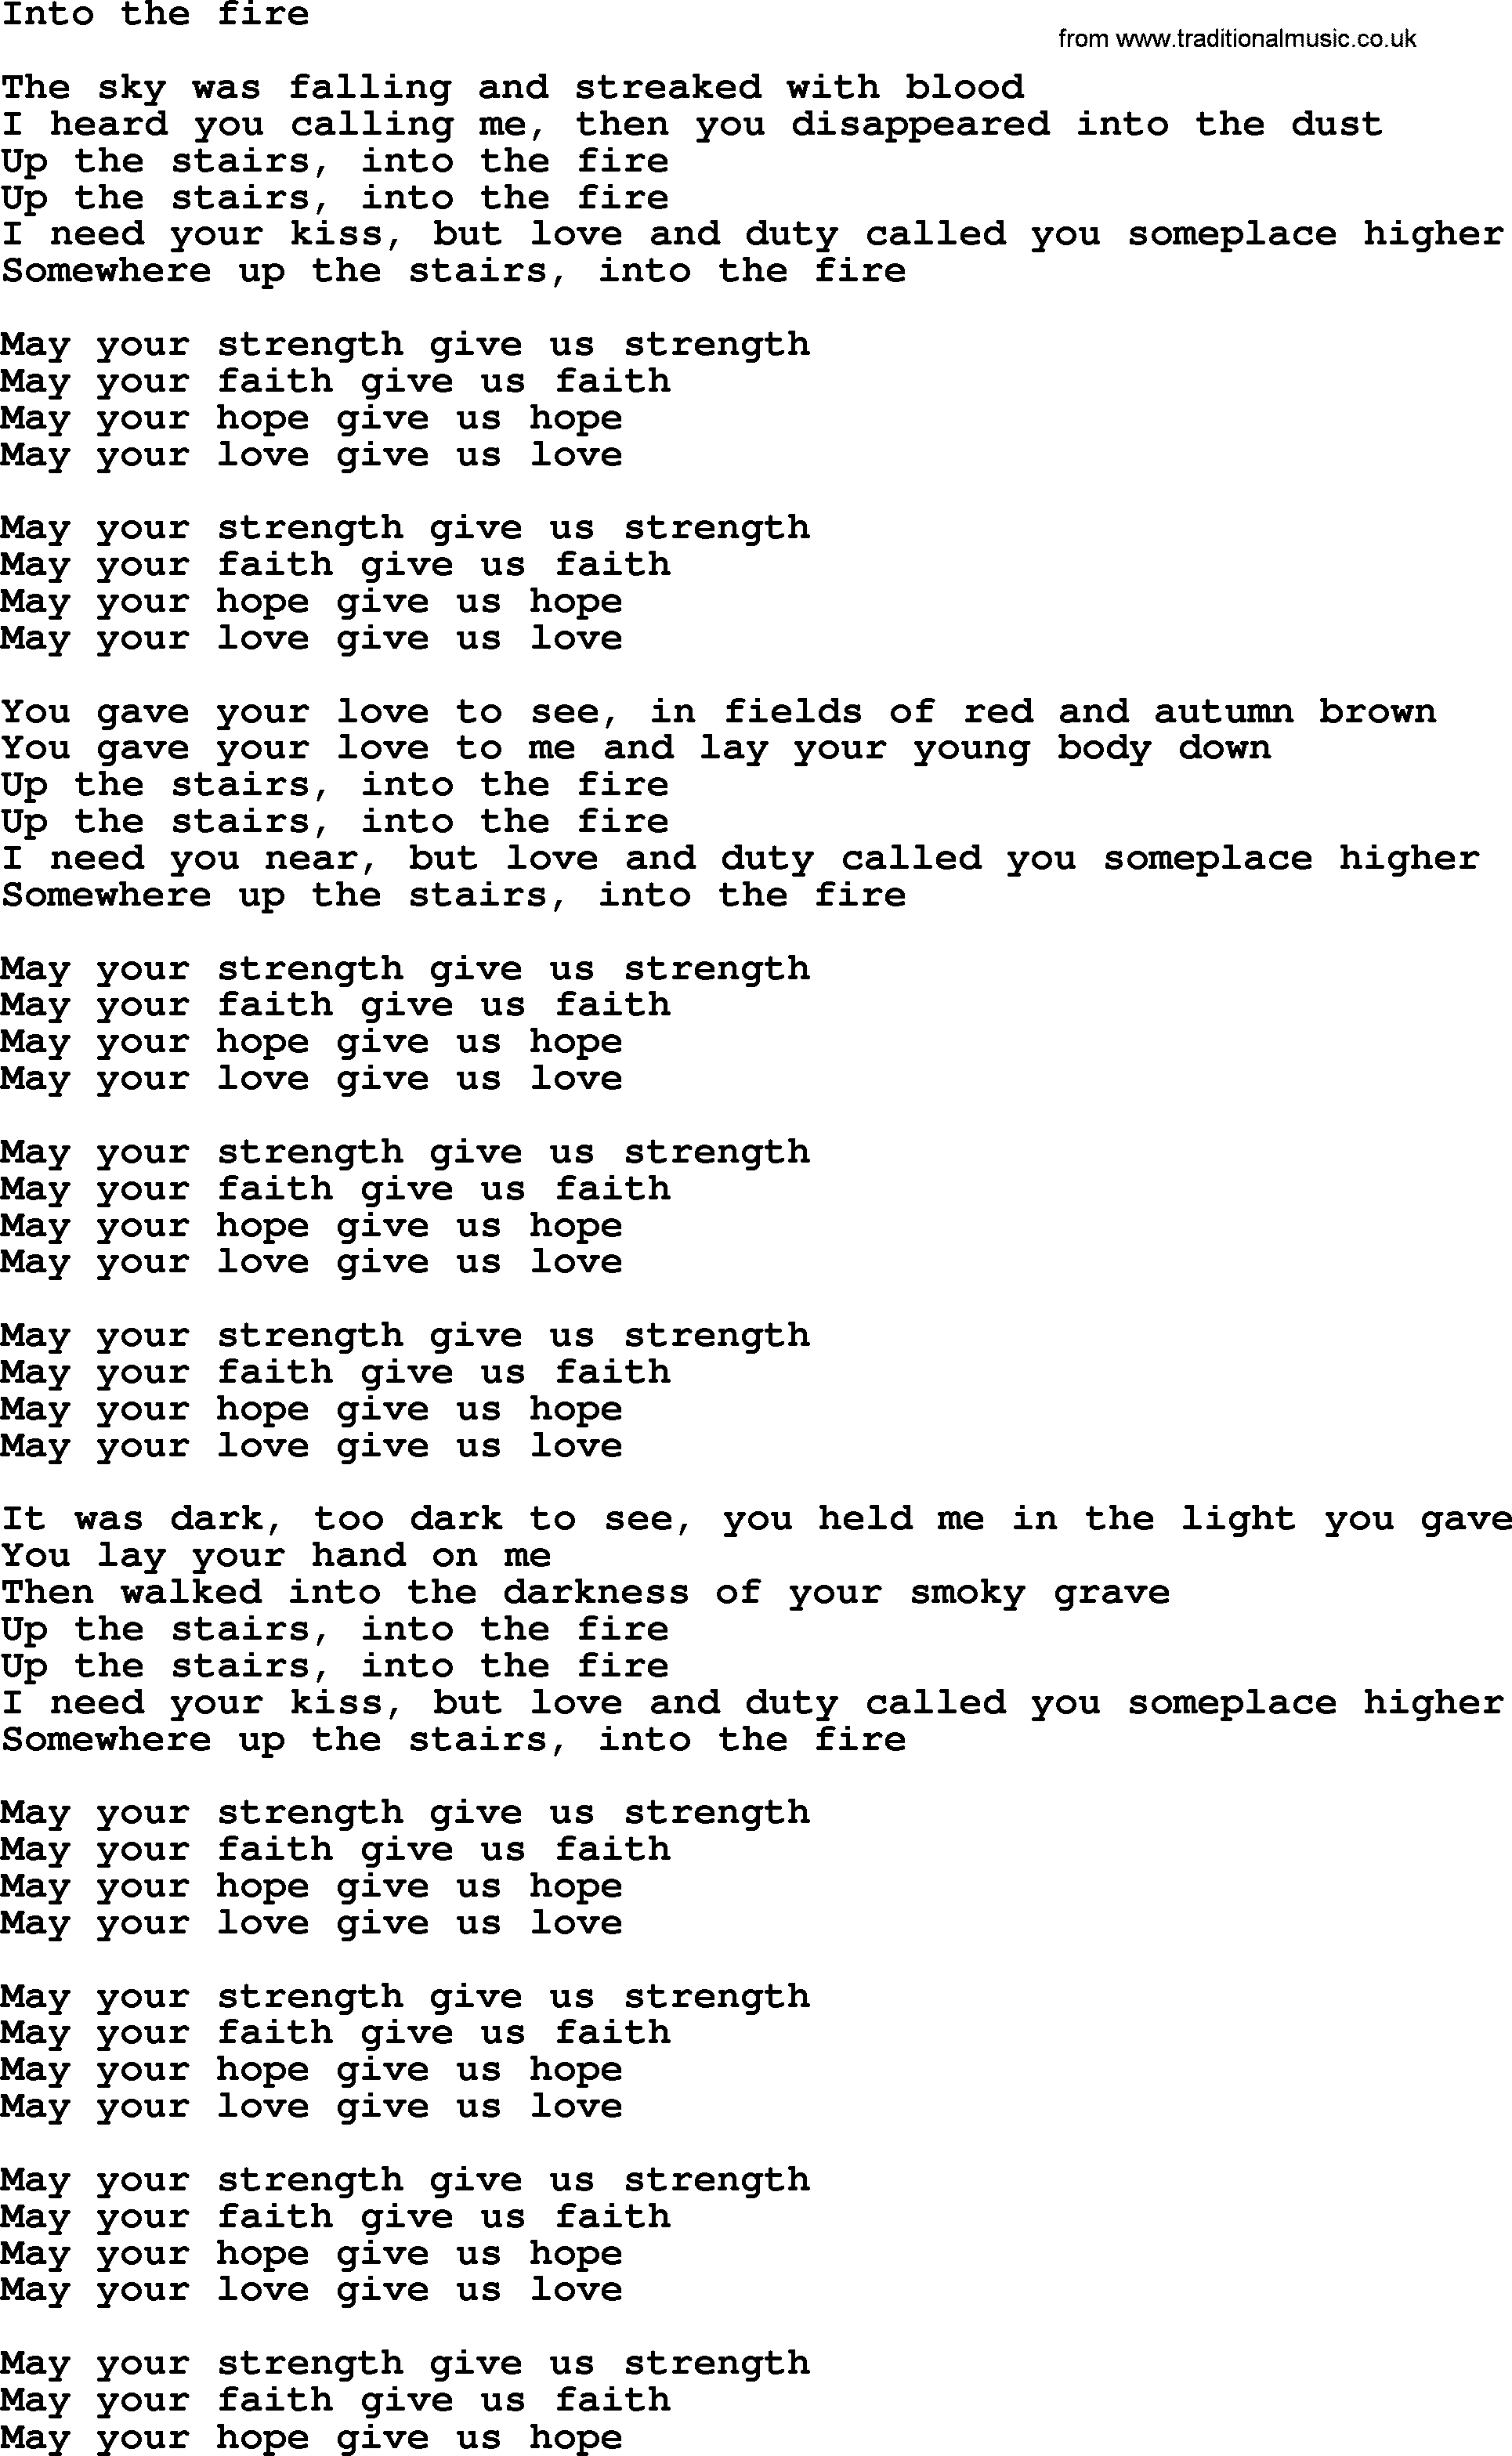 Bruce Springsteen song: Into The Fire lyrics